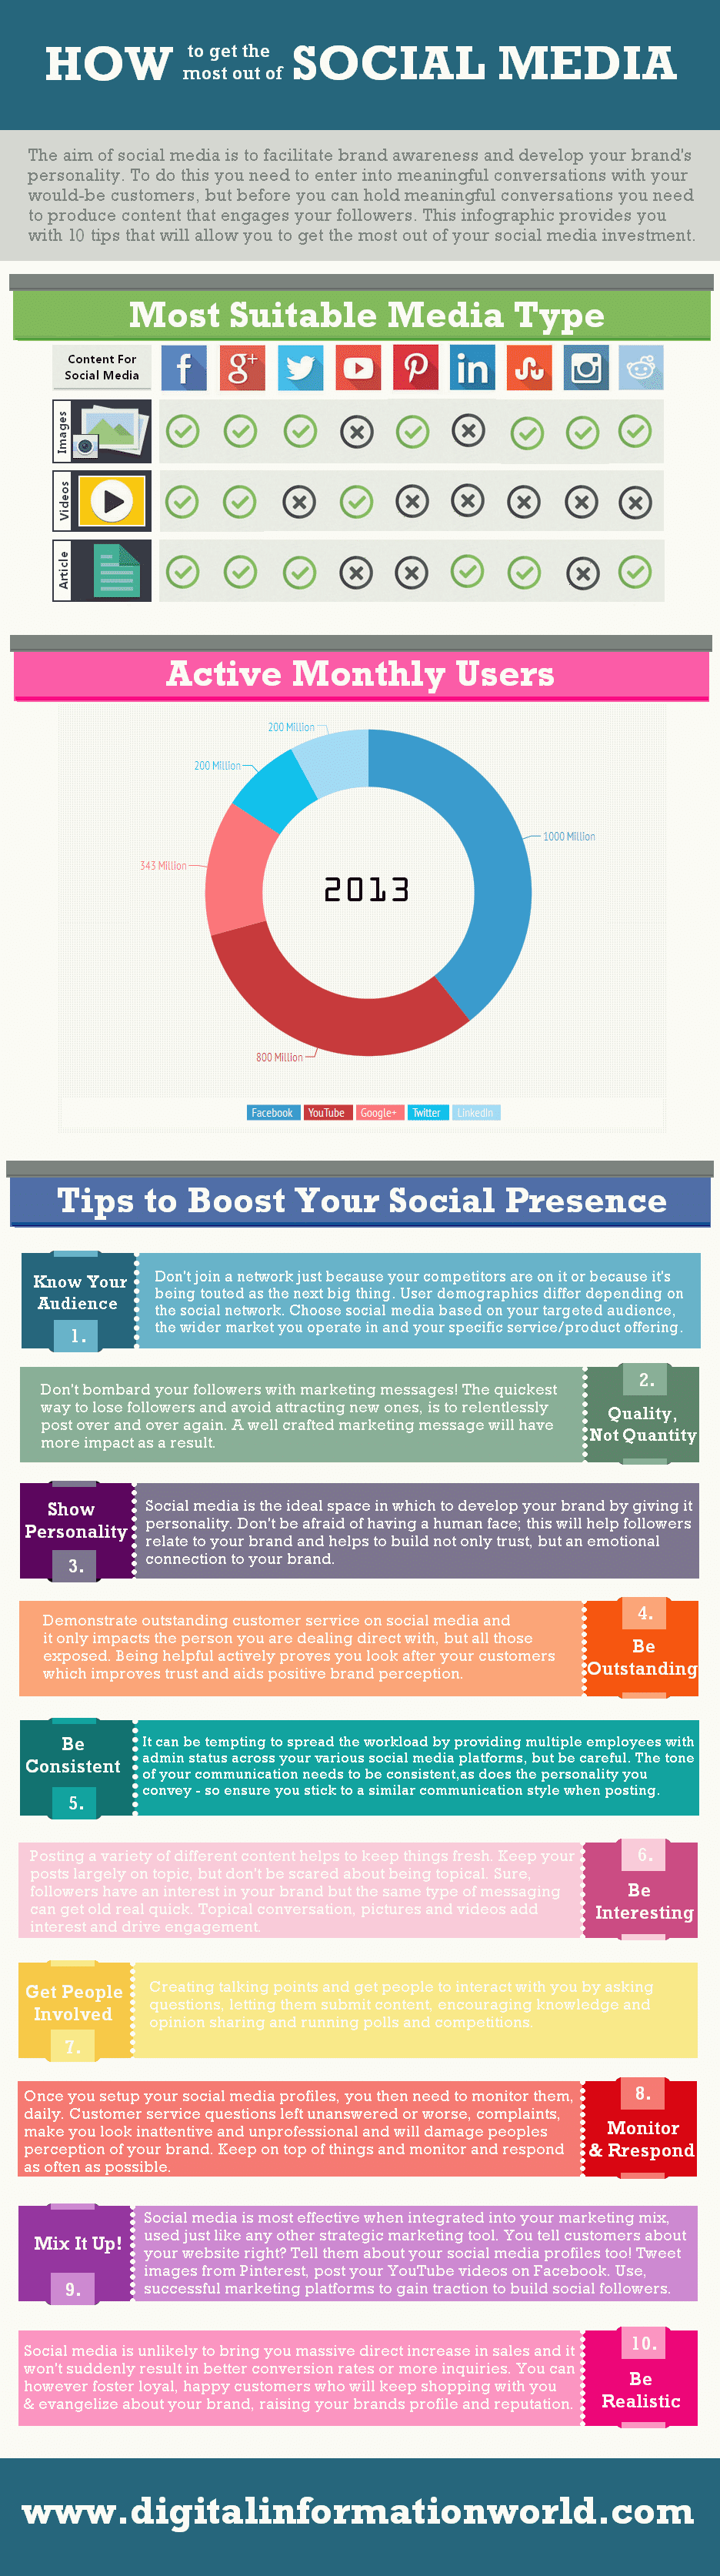 How To Maximize Brand Awareness On Social Media [Infographic]